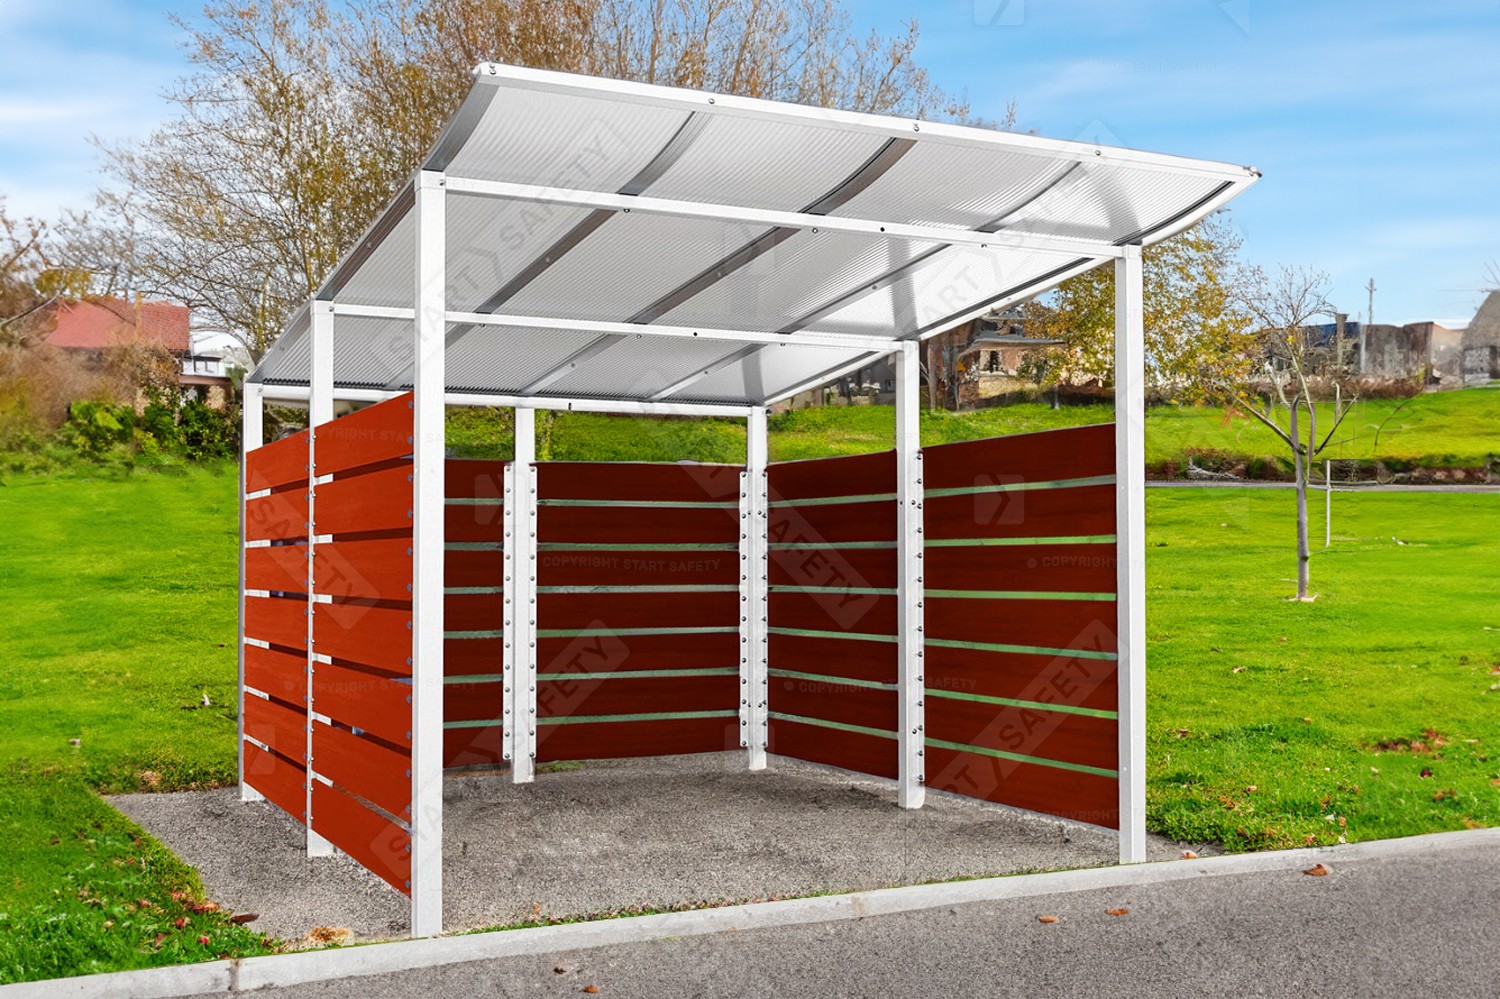 Large Procty Modulo Bin Shelter In White Installed in FResidential Area